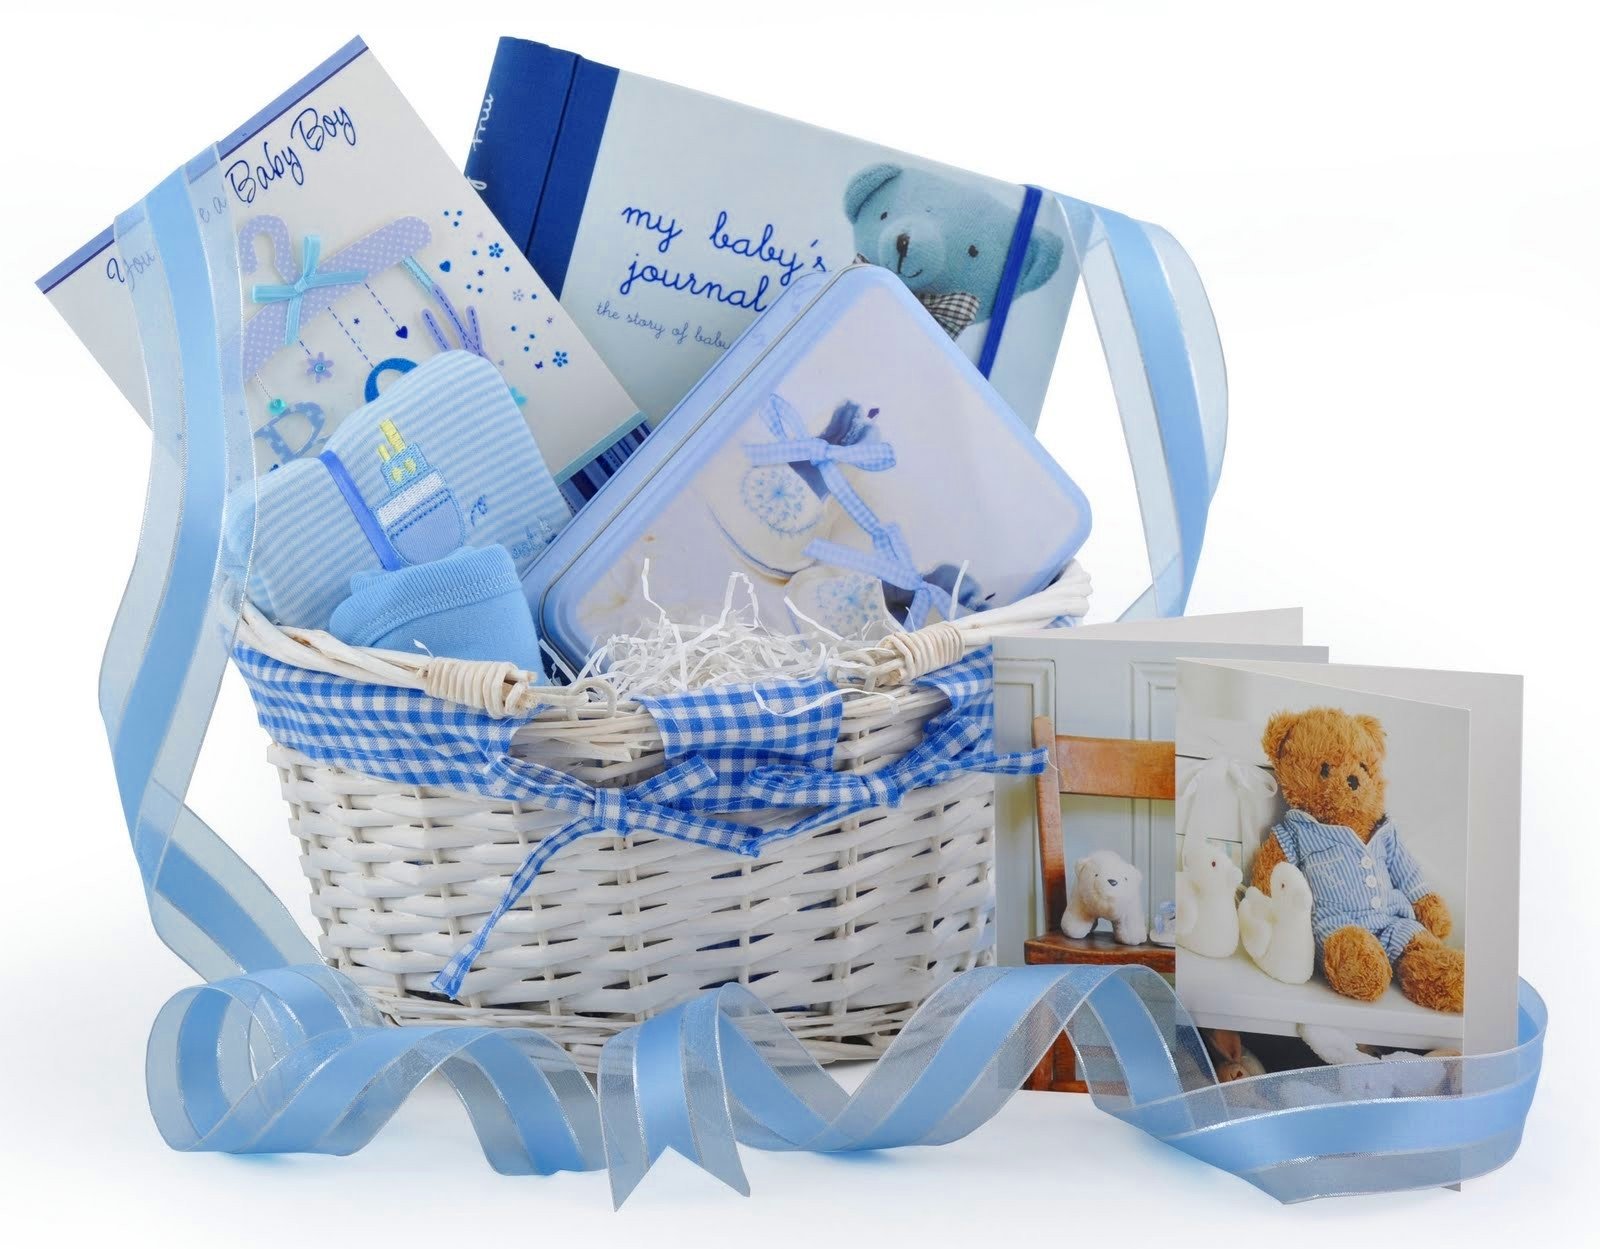 10 Pretty Unique Baby Boy Gifts Ideas photo baby shower gift ideas funny image 2022